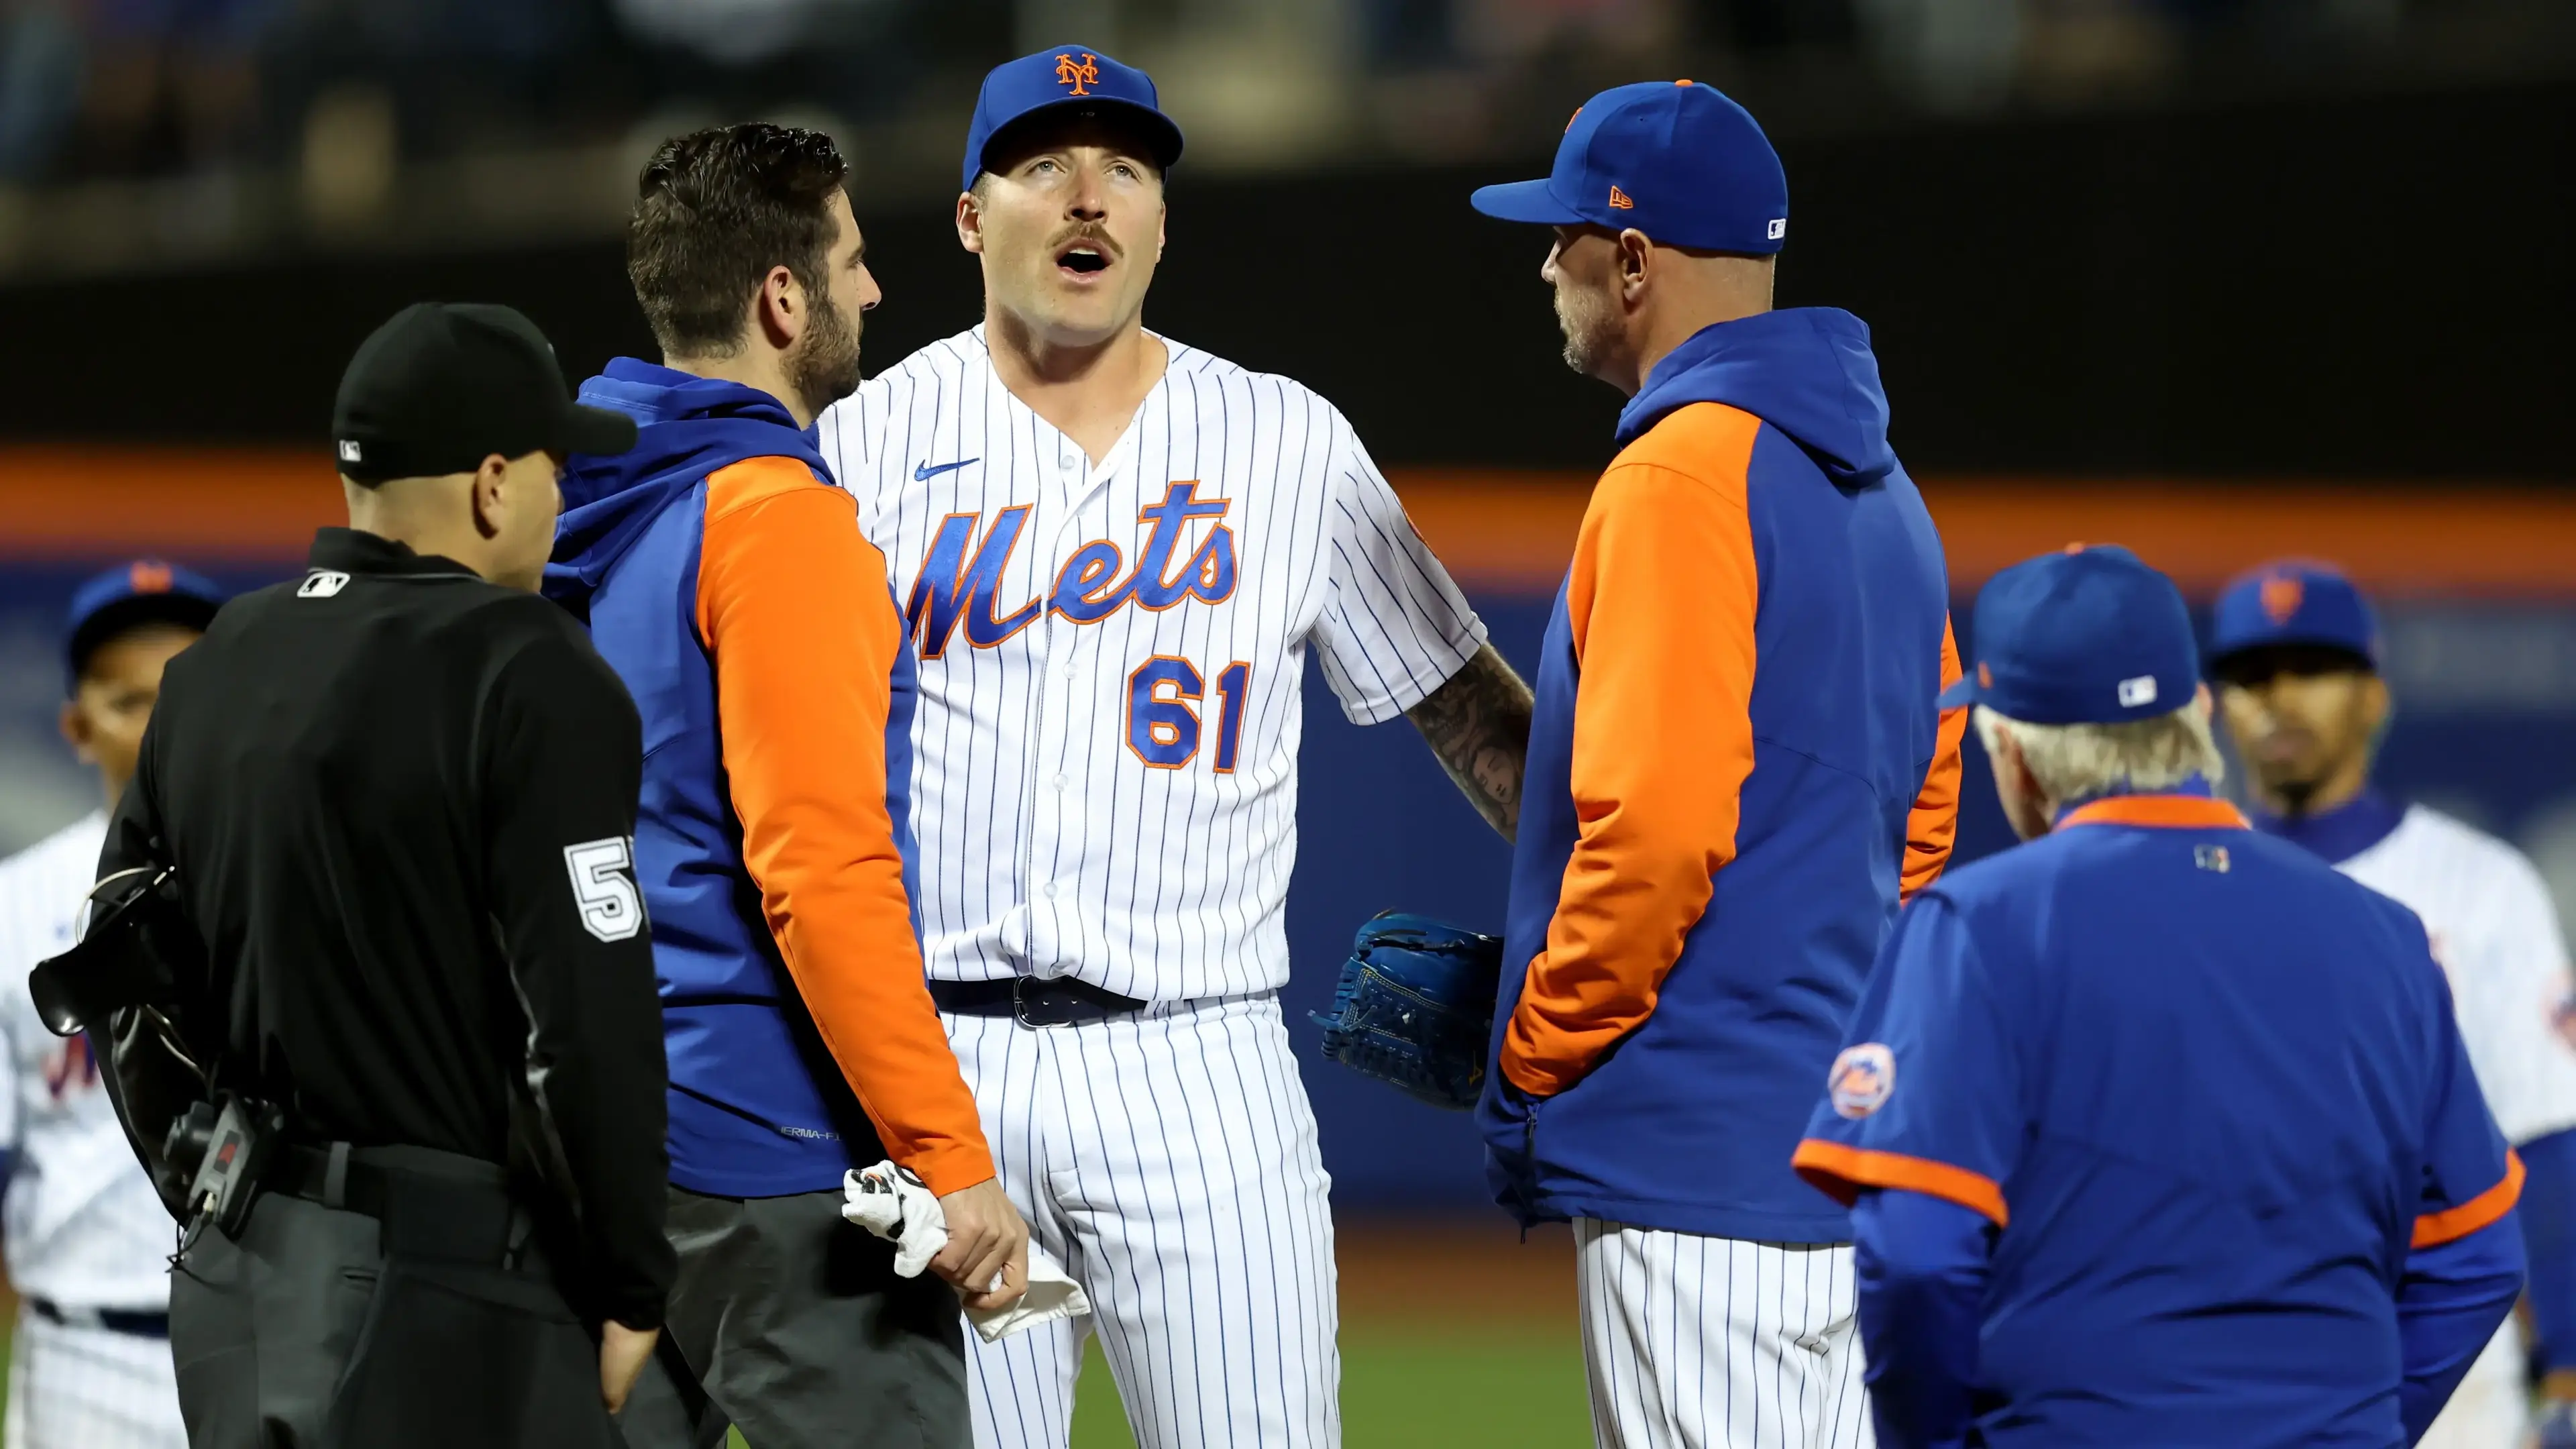 New York Mets relief pitcher Sean Reid-Foley (61) talks to coaches and trainers and home plate umpire Jansen Visconti (52) before leaving the game with an apparent injury during the eighth inning / Brad Penner-USA TODAY Sports